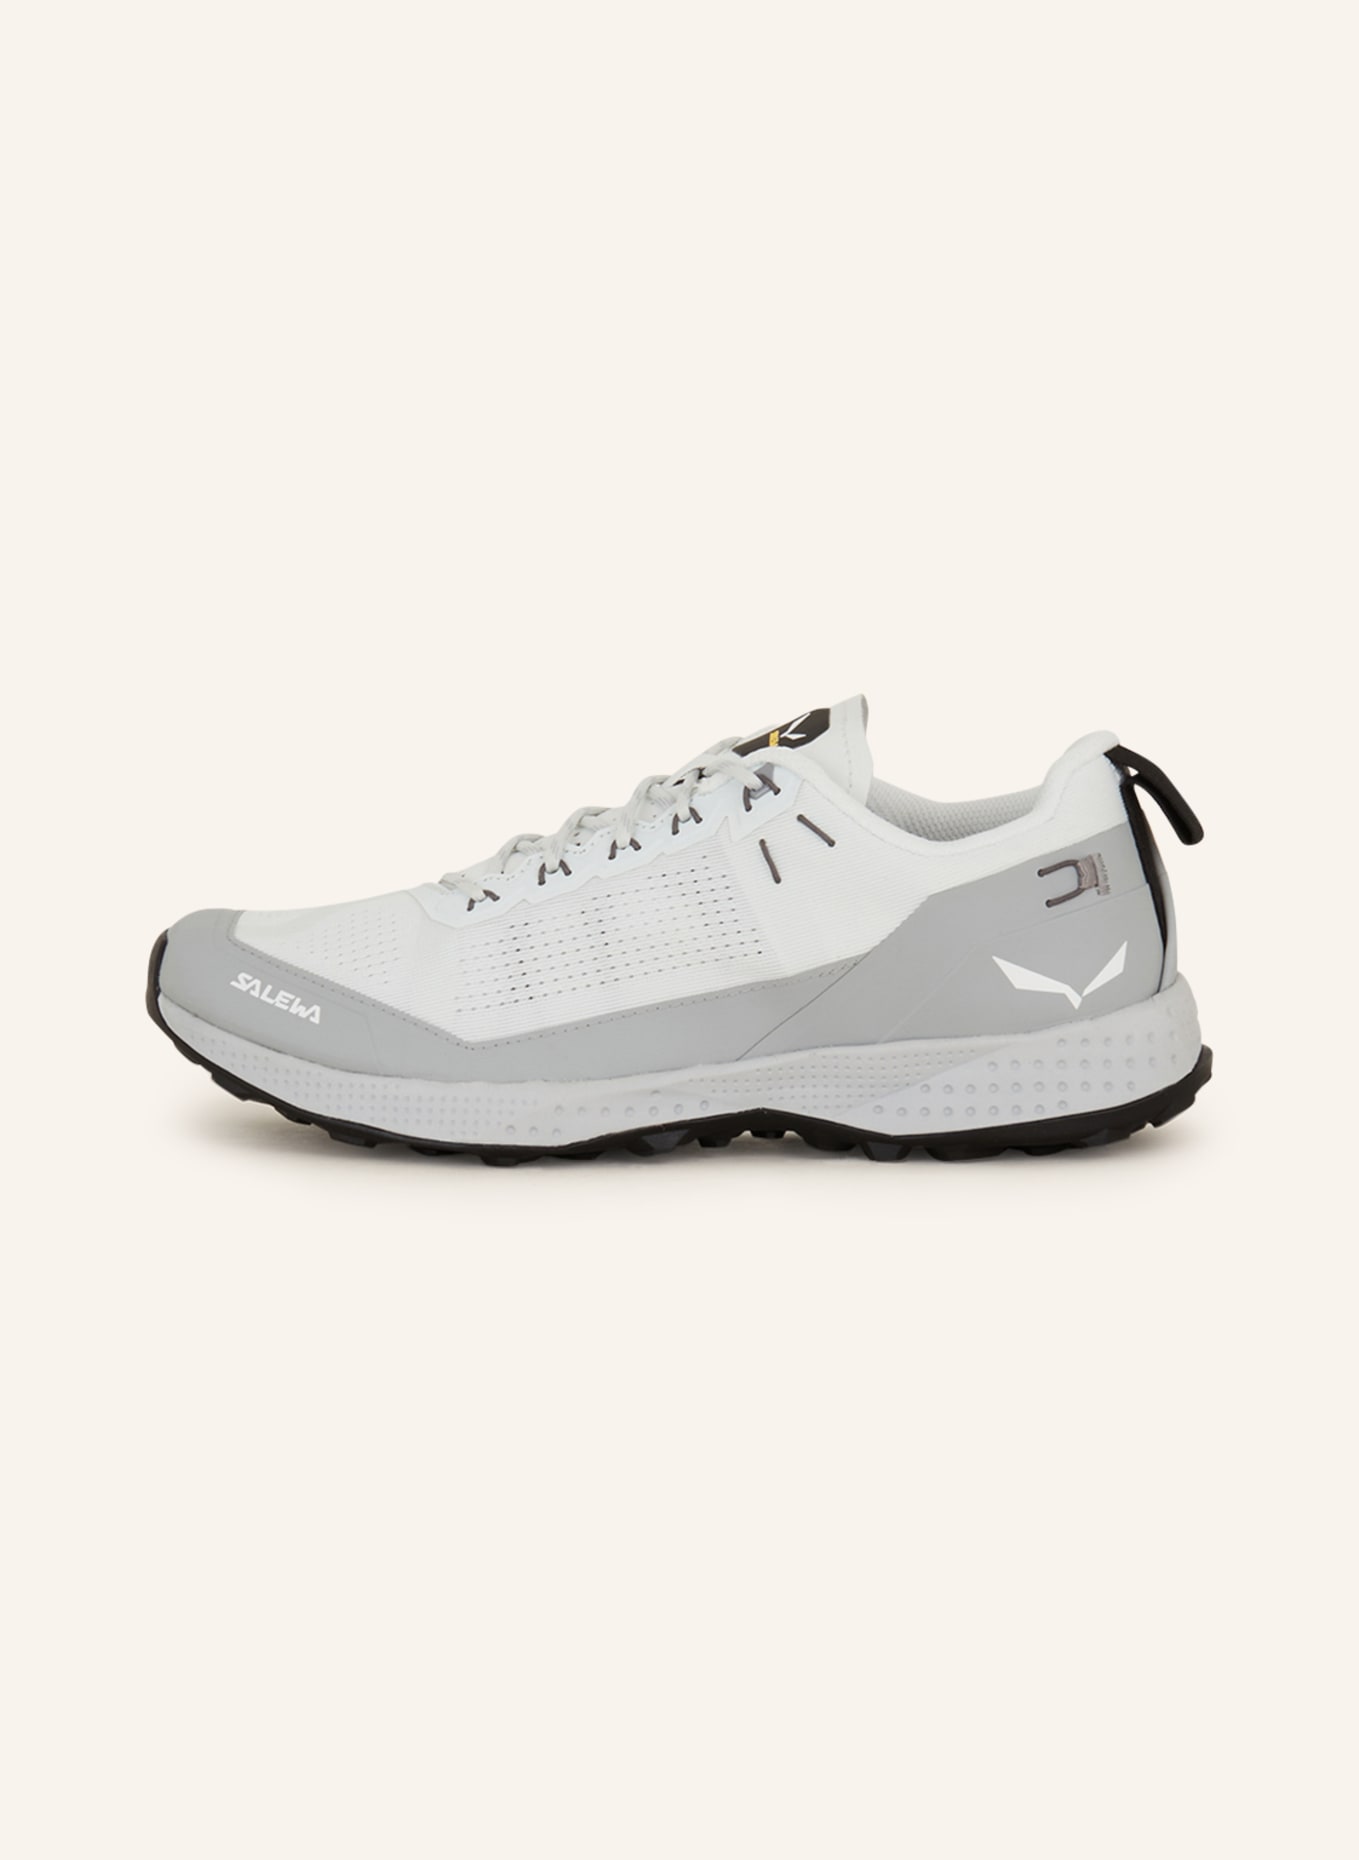 SALEWA Multifunctional shoes PEDROC AIR, Color: LIGHT GRAY/ GRAY (Image 4)